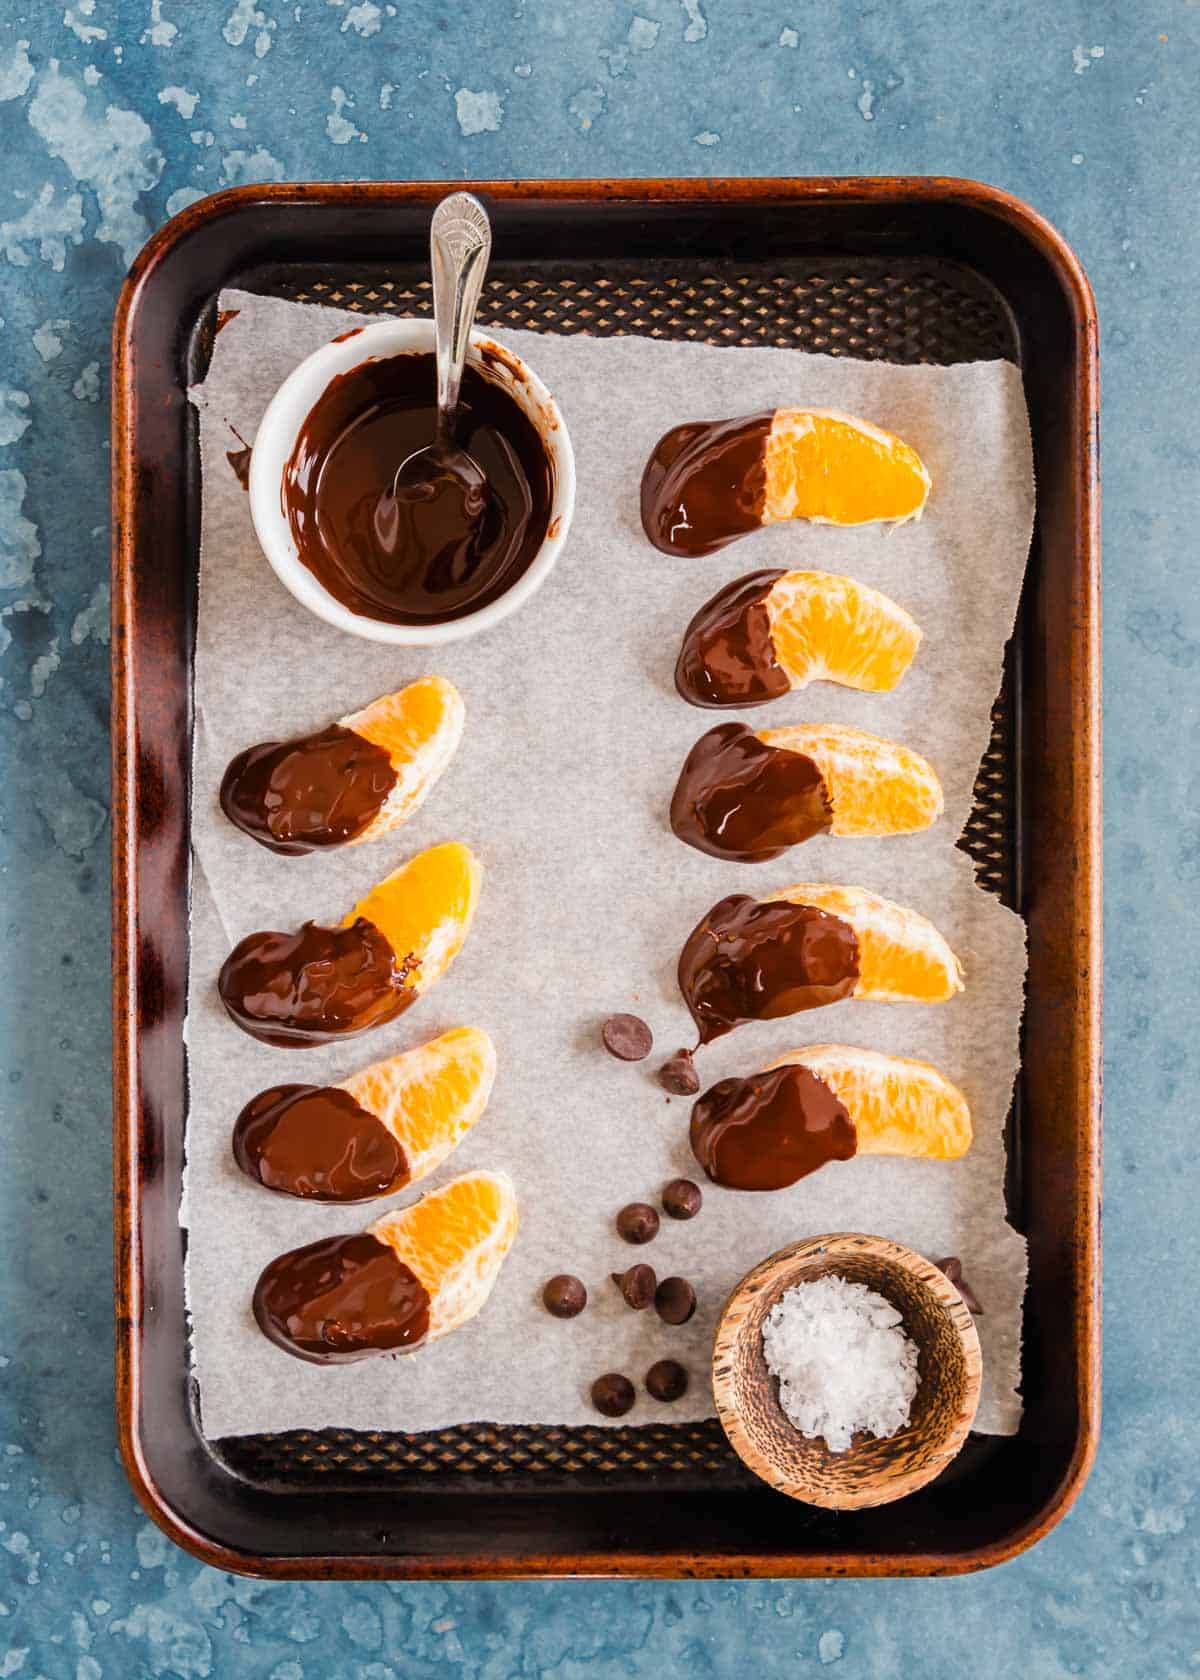 Orange slices dipped in chocolate on parchment paper lined baking sheet.